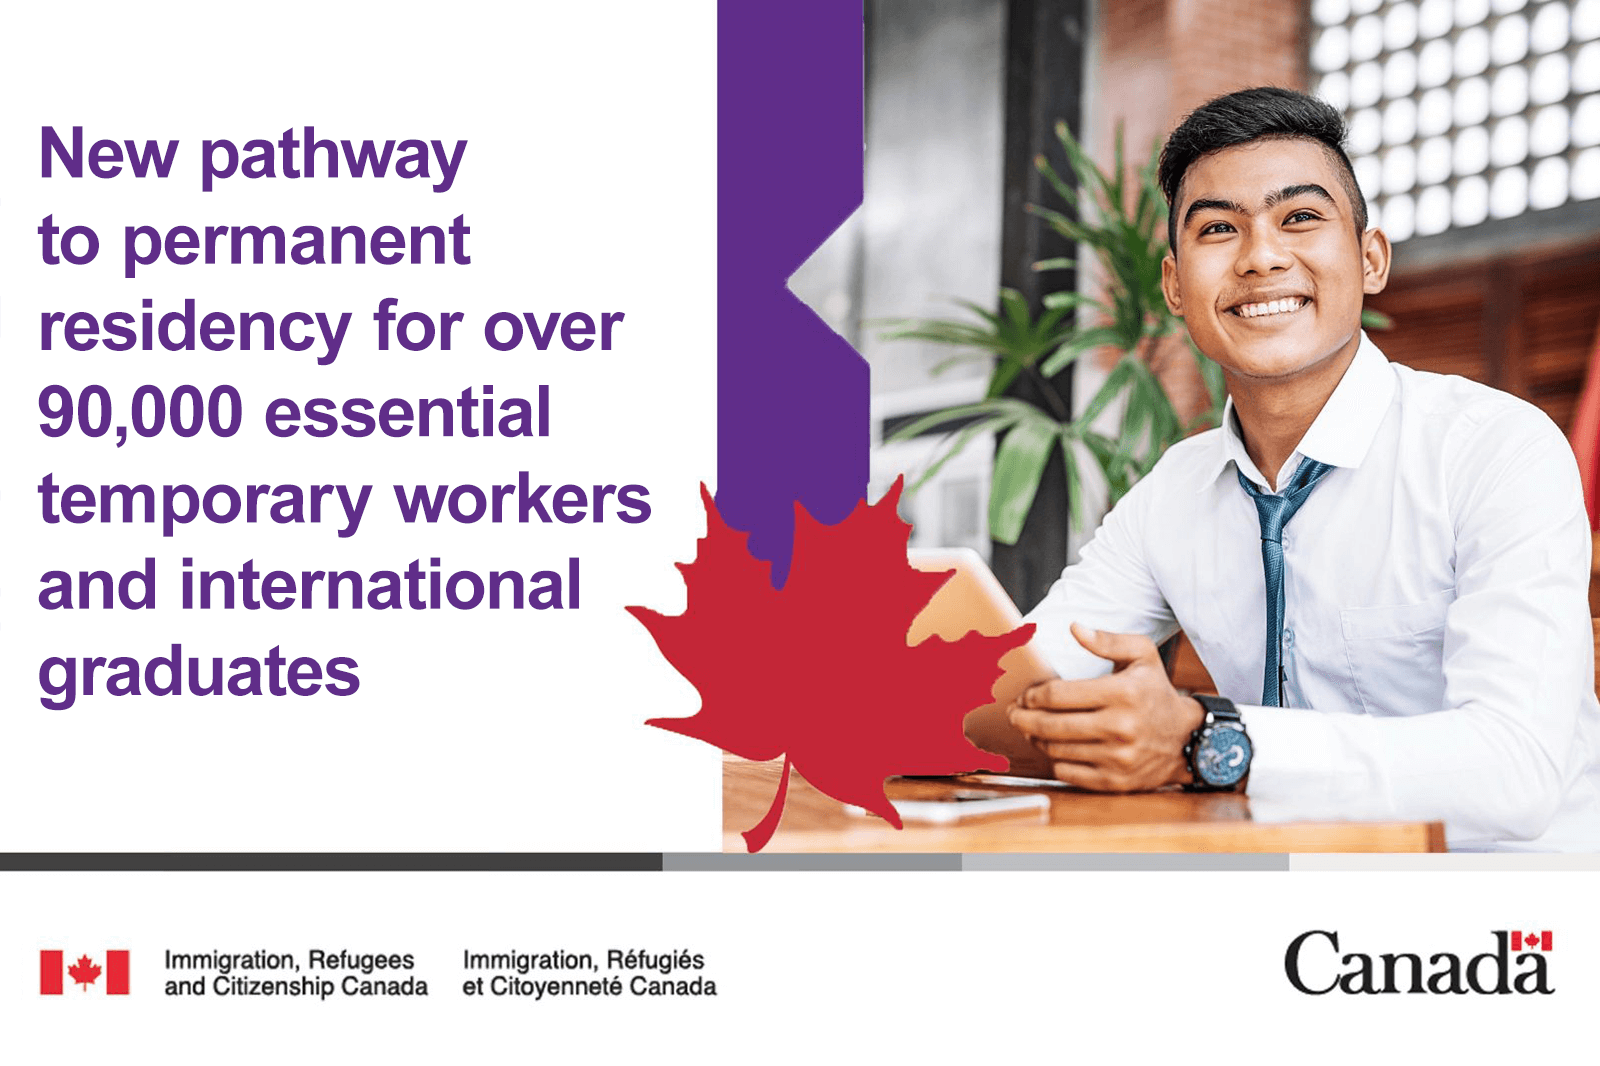 Permanent residence pathway now availabe for up to 90,000 temporary workers